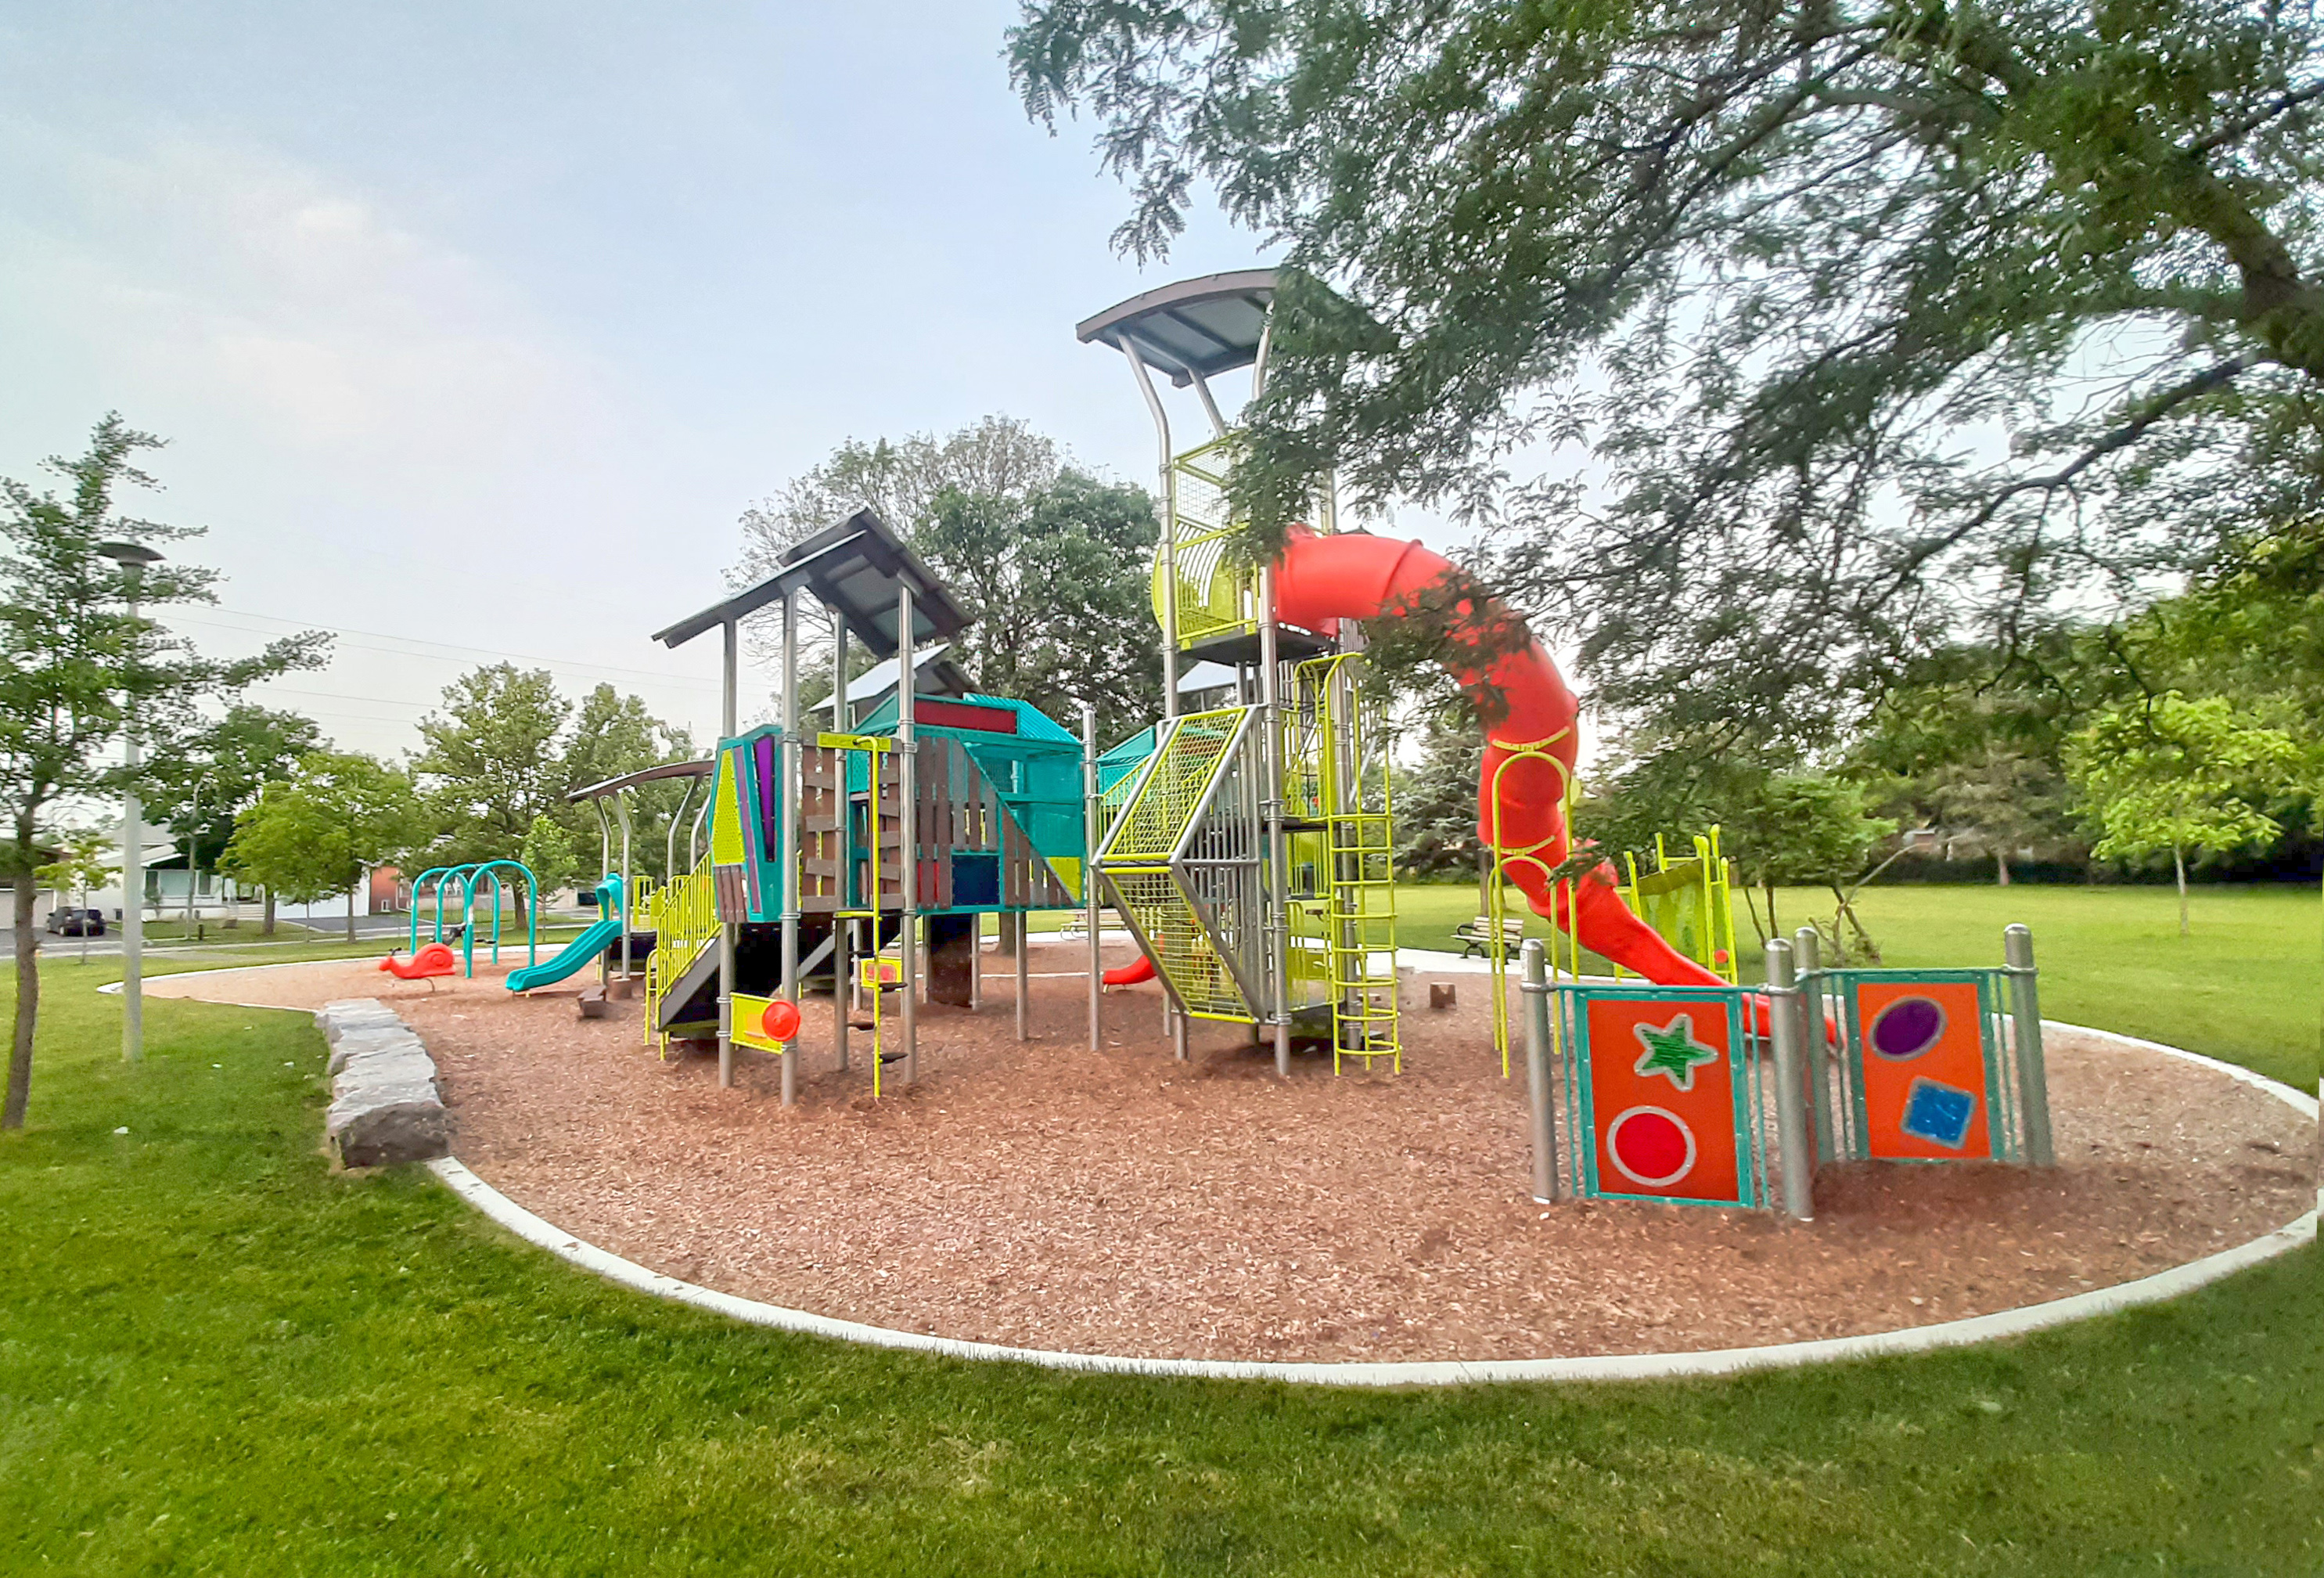 New play equipment at Charlton Park features brightly coloured climbing structures and slides of various heights. Swing set and other play features are also visible. All play equipment sits on a wood fiber play surface.